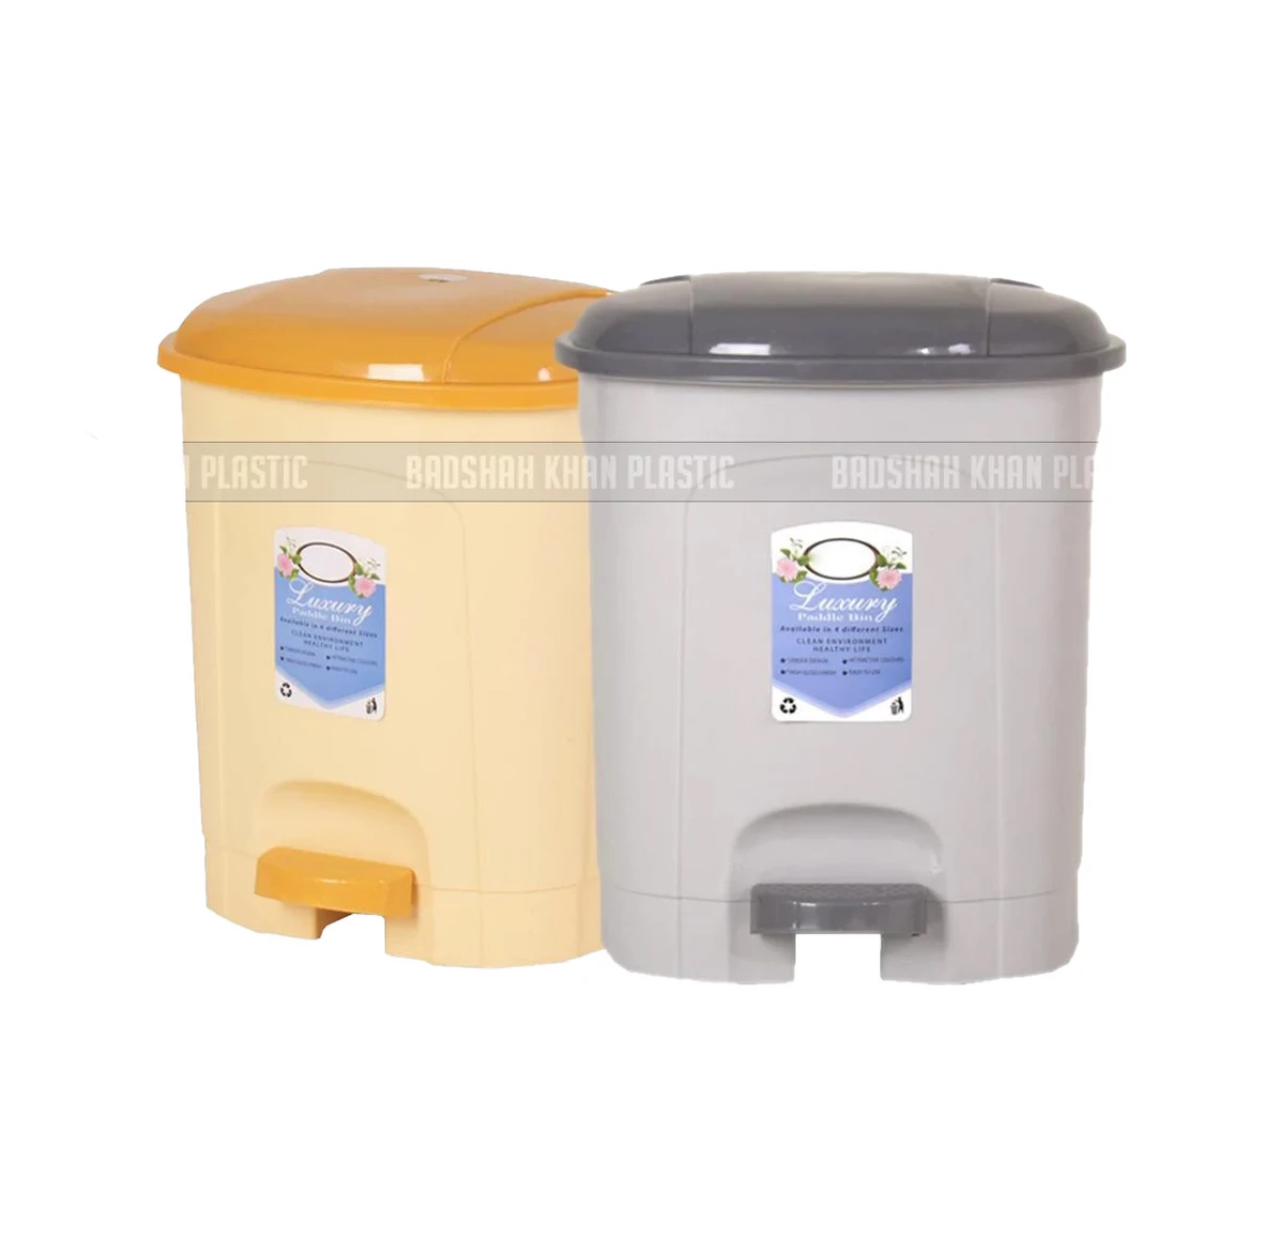 Premium Pedal Dustbin for home and office use